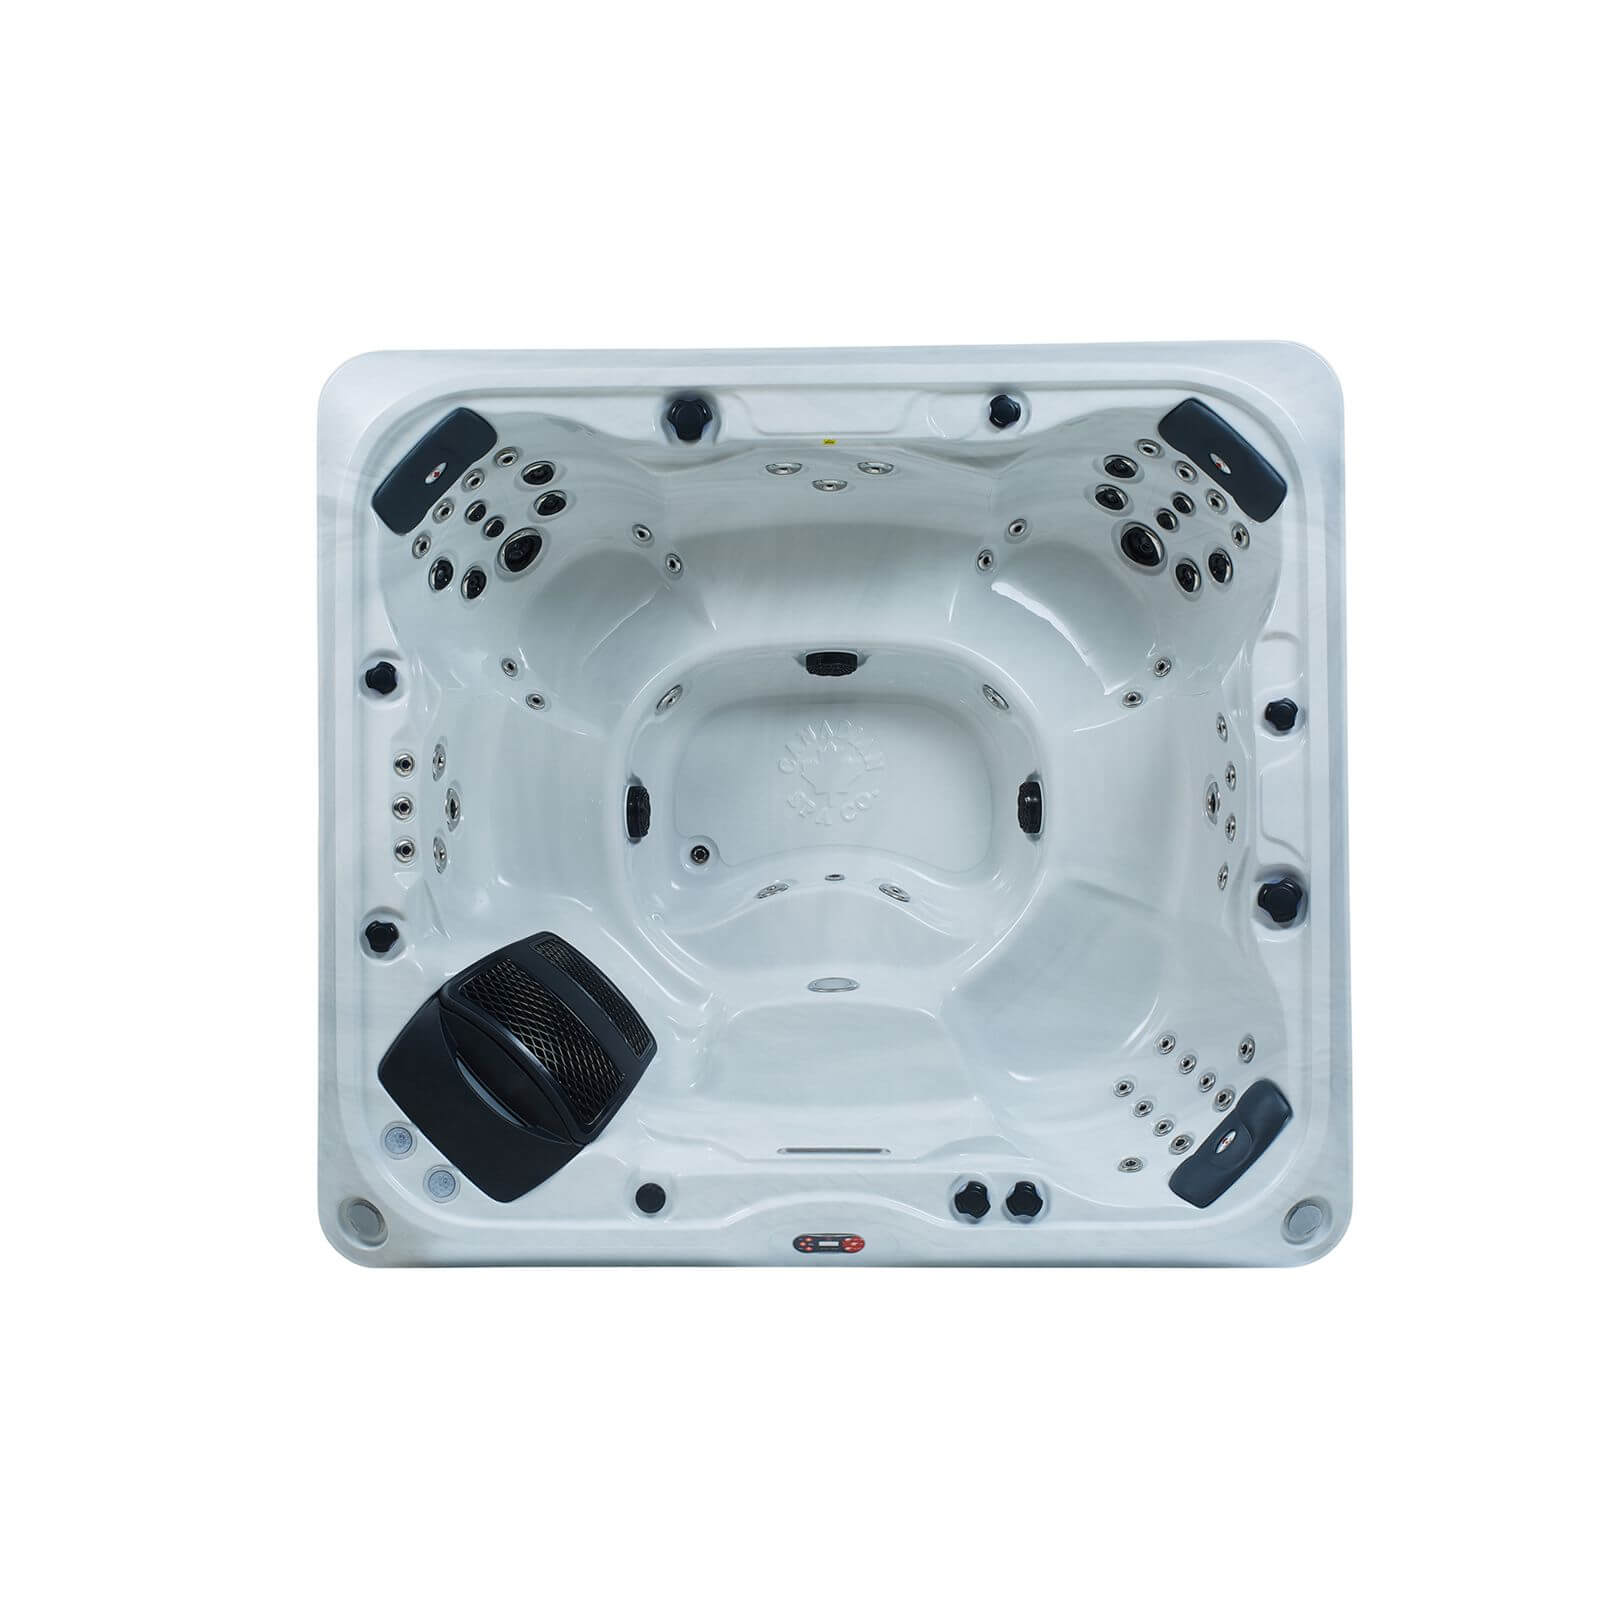 Canadian Spa Co. Kingston 55-Jet 7 Person Hot Tub